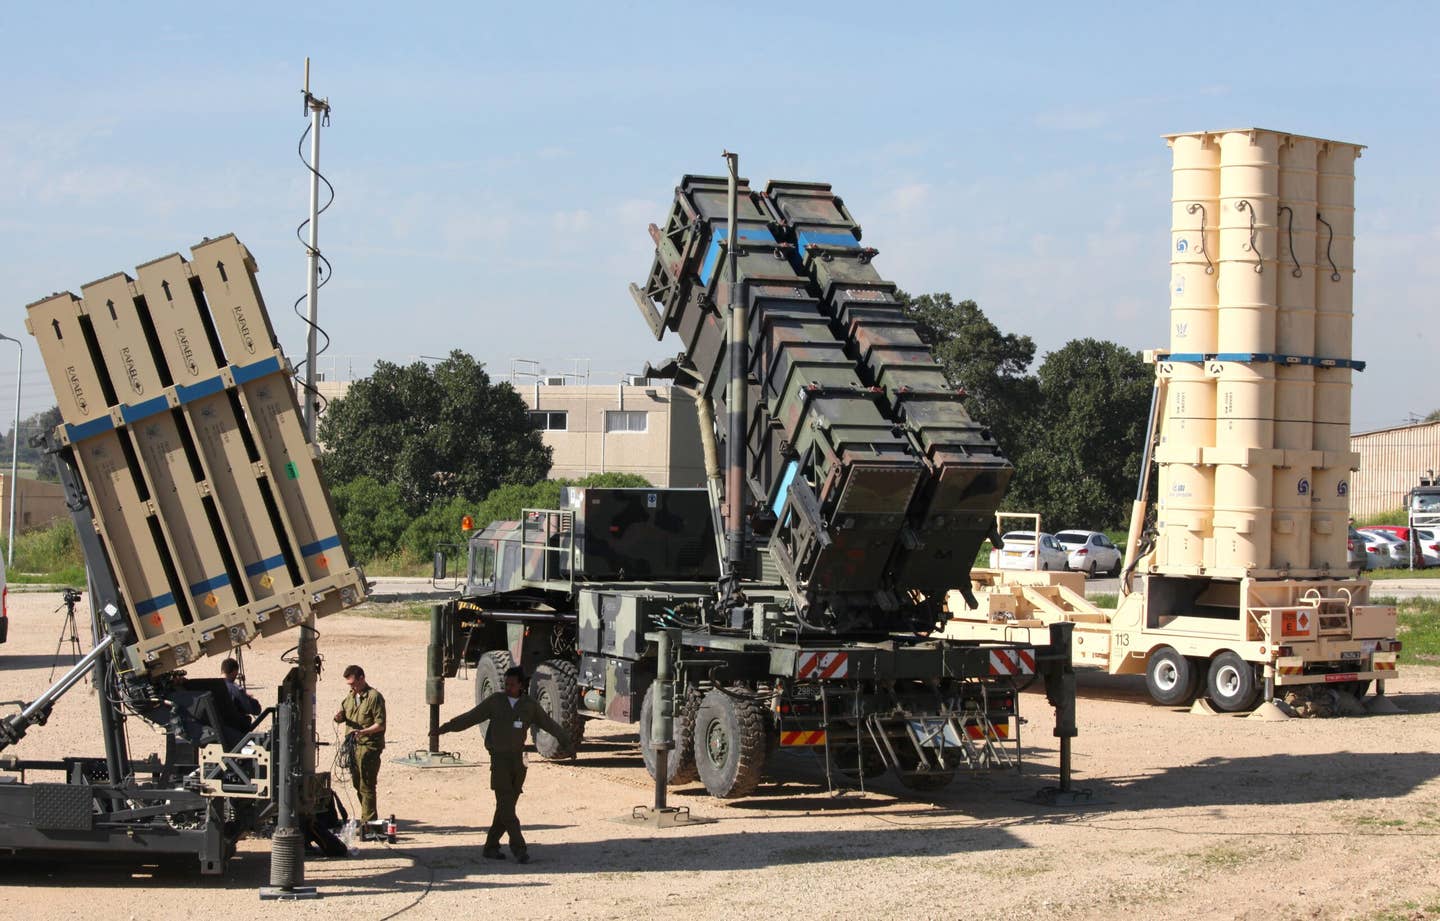 An Israeli Iron Dome air defense system (left), a MIM-104 Patriot surface-to-air missile launcher (center), and an Arrow 3 anti-ballistic missile launcher during Exercise Juniper Cobra at Hatzor Israeli Air Force Base in 2016. <em>GIL COHEN-MAGEN/AFP via Getty Images</em>